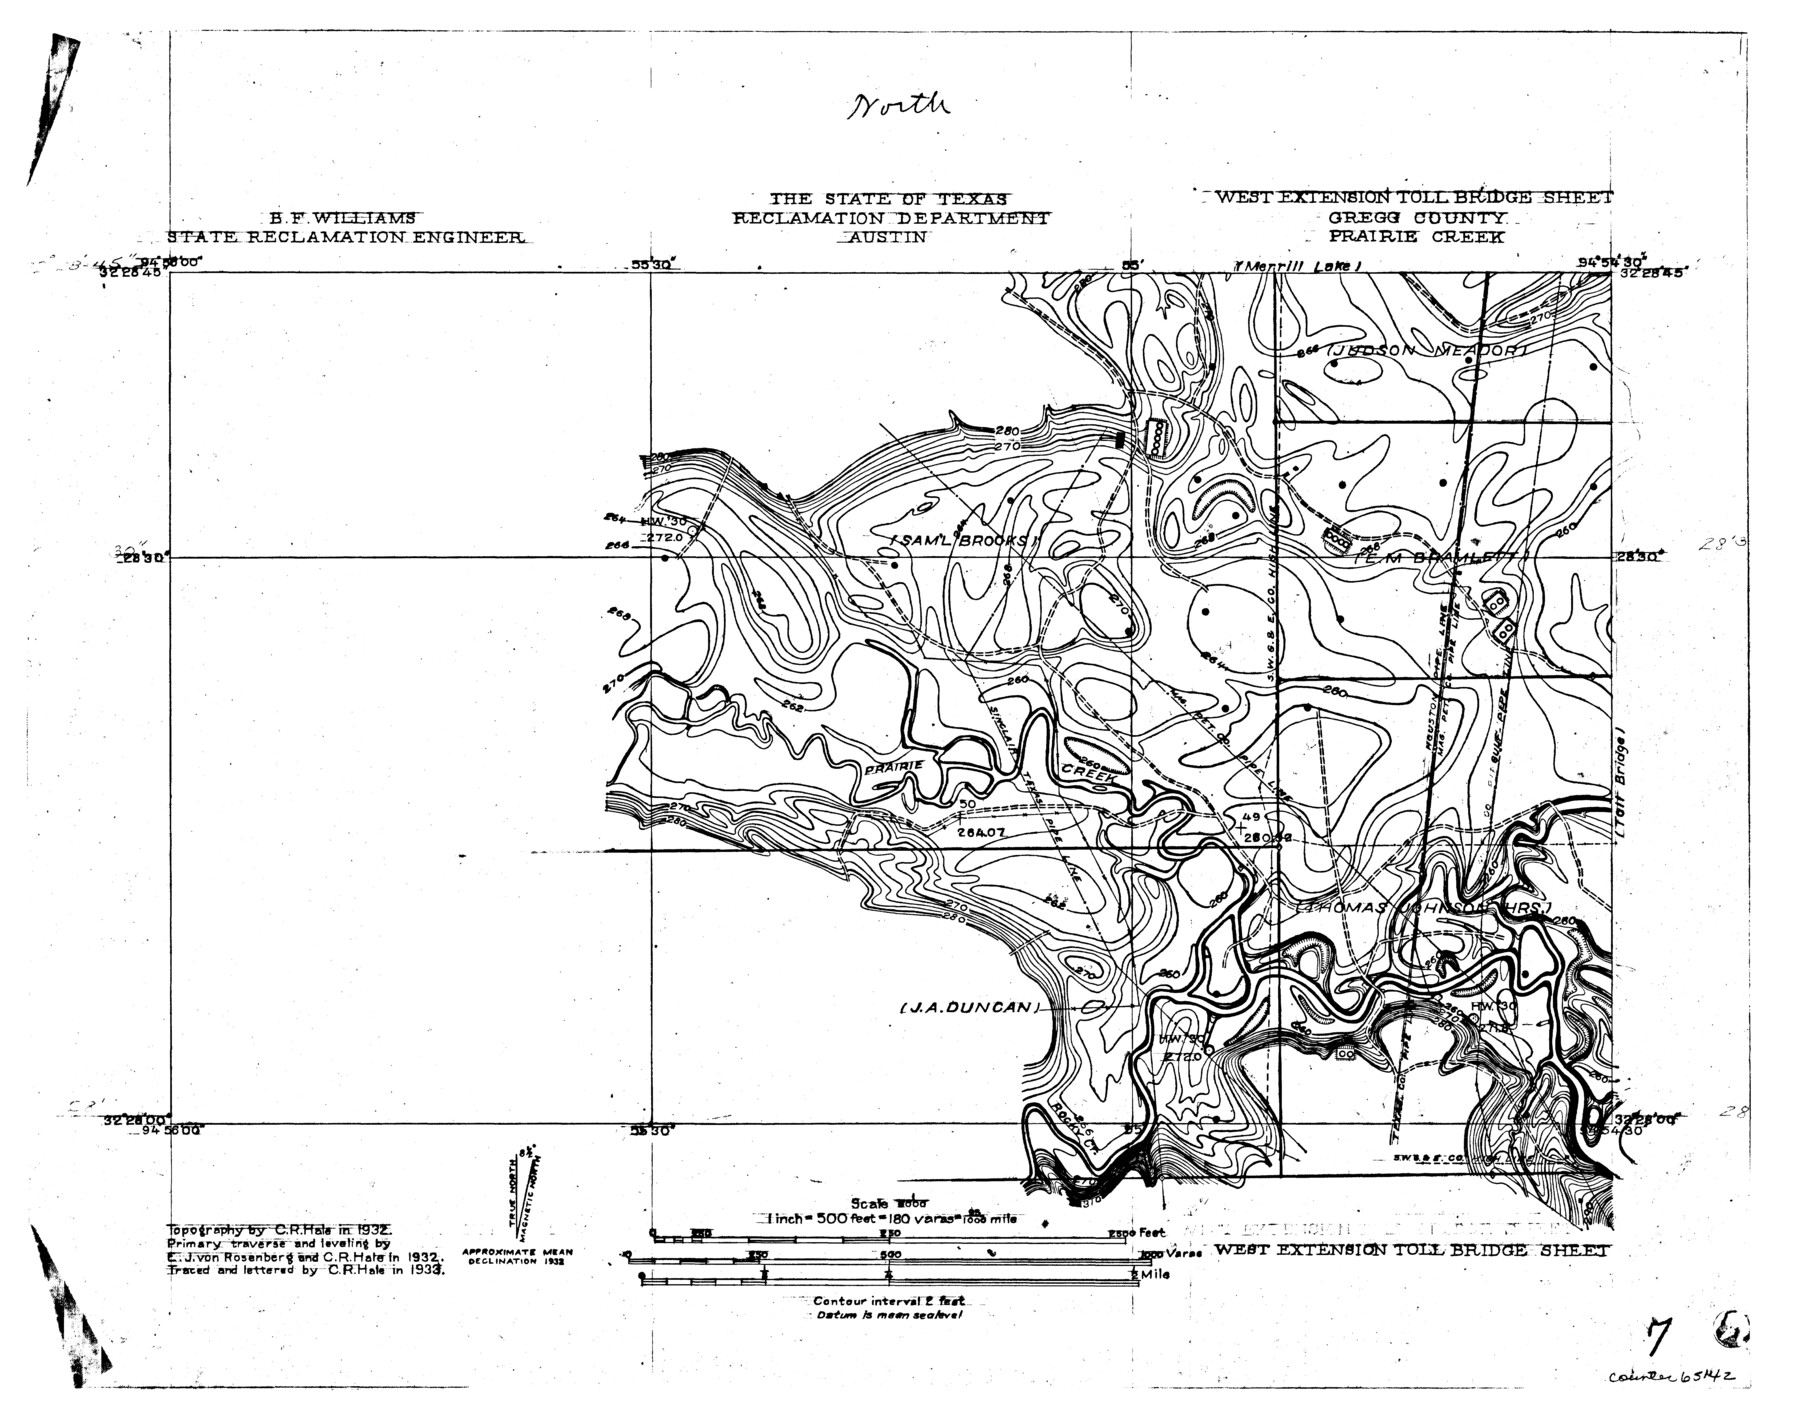 65142, Sabine River, West Extension Toll Bridge Sheet, General Map Collection